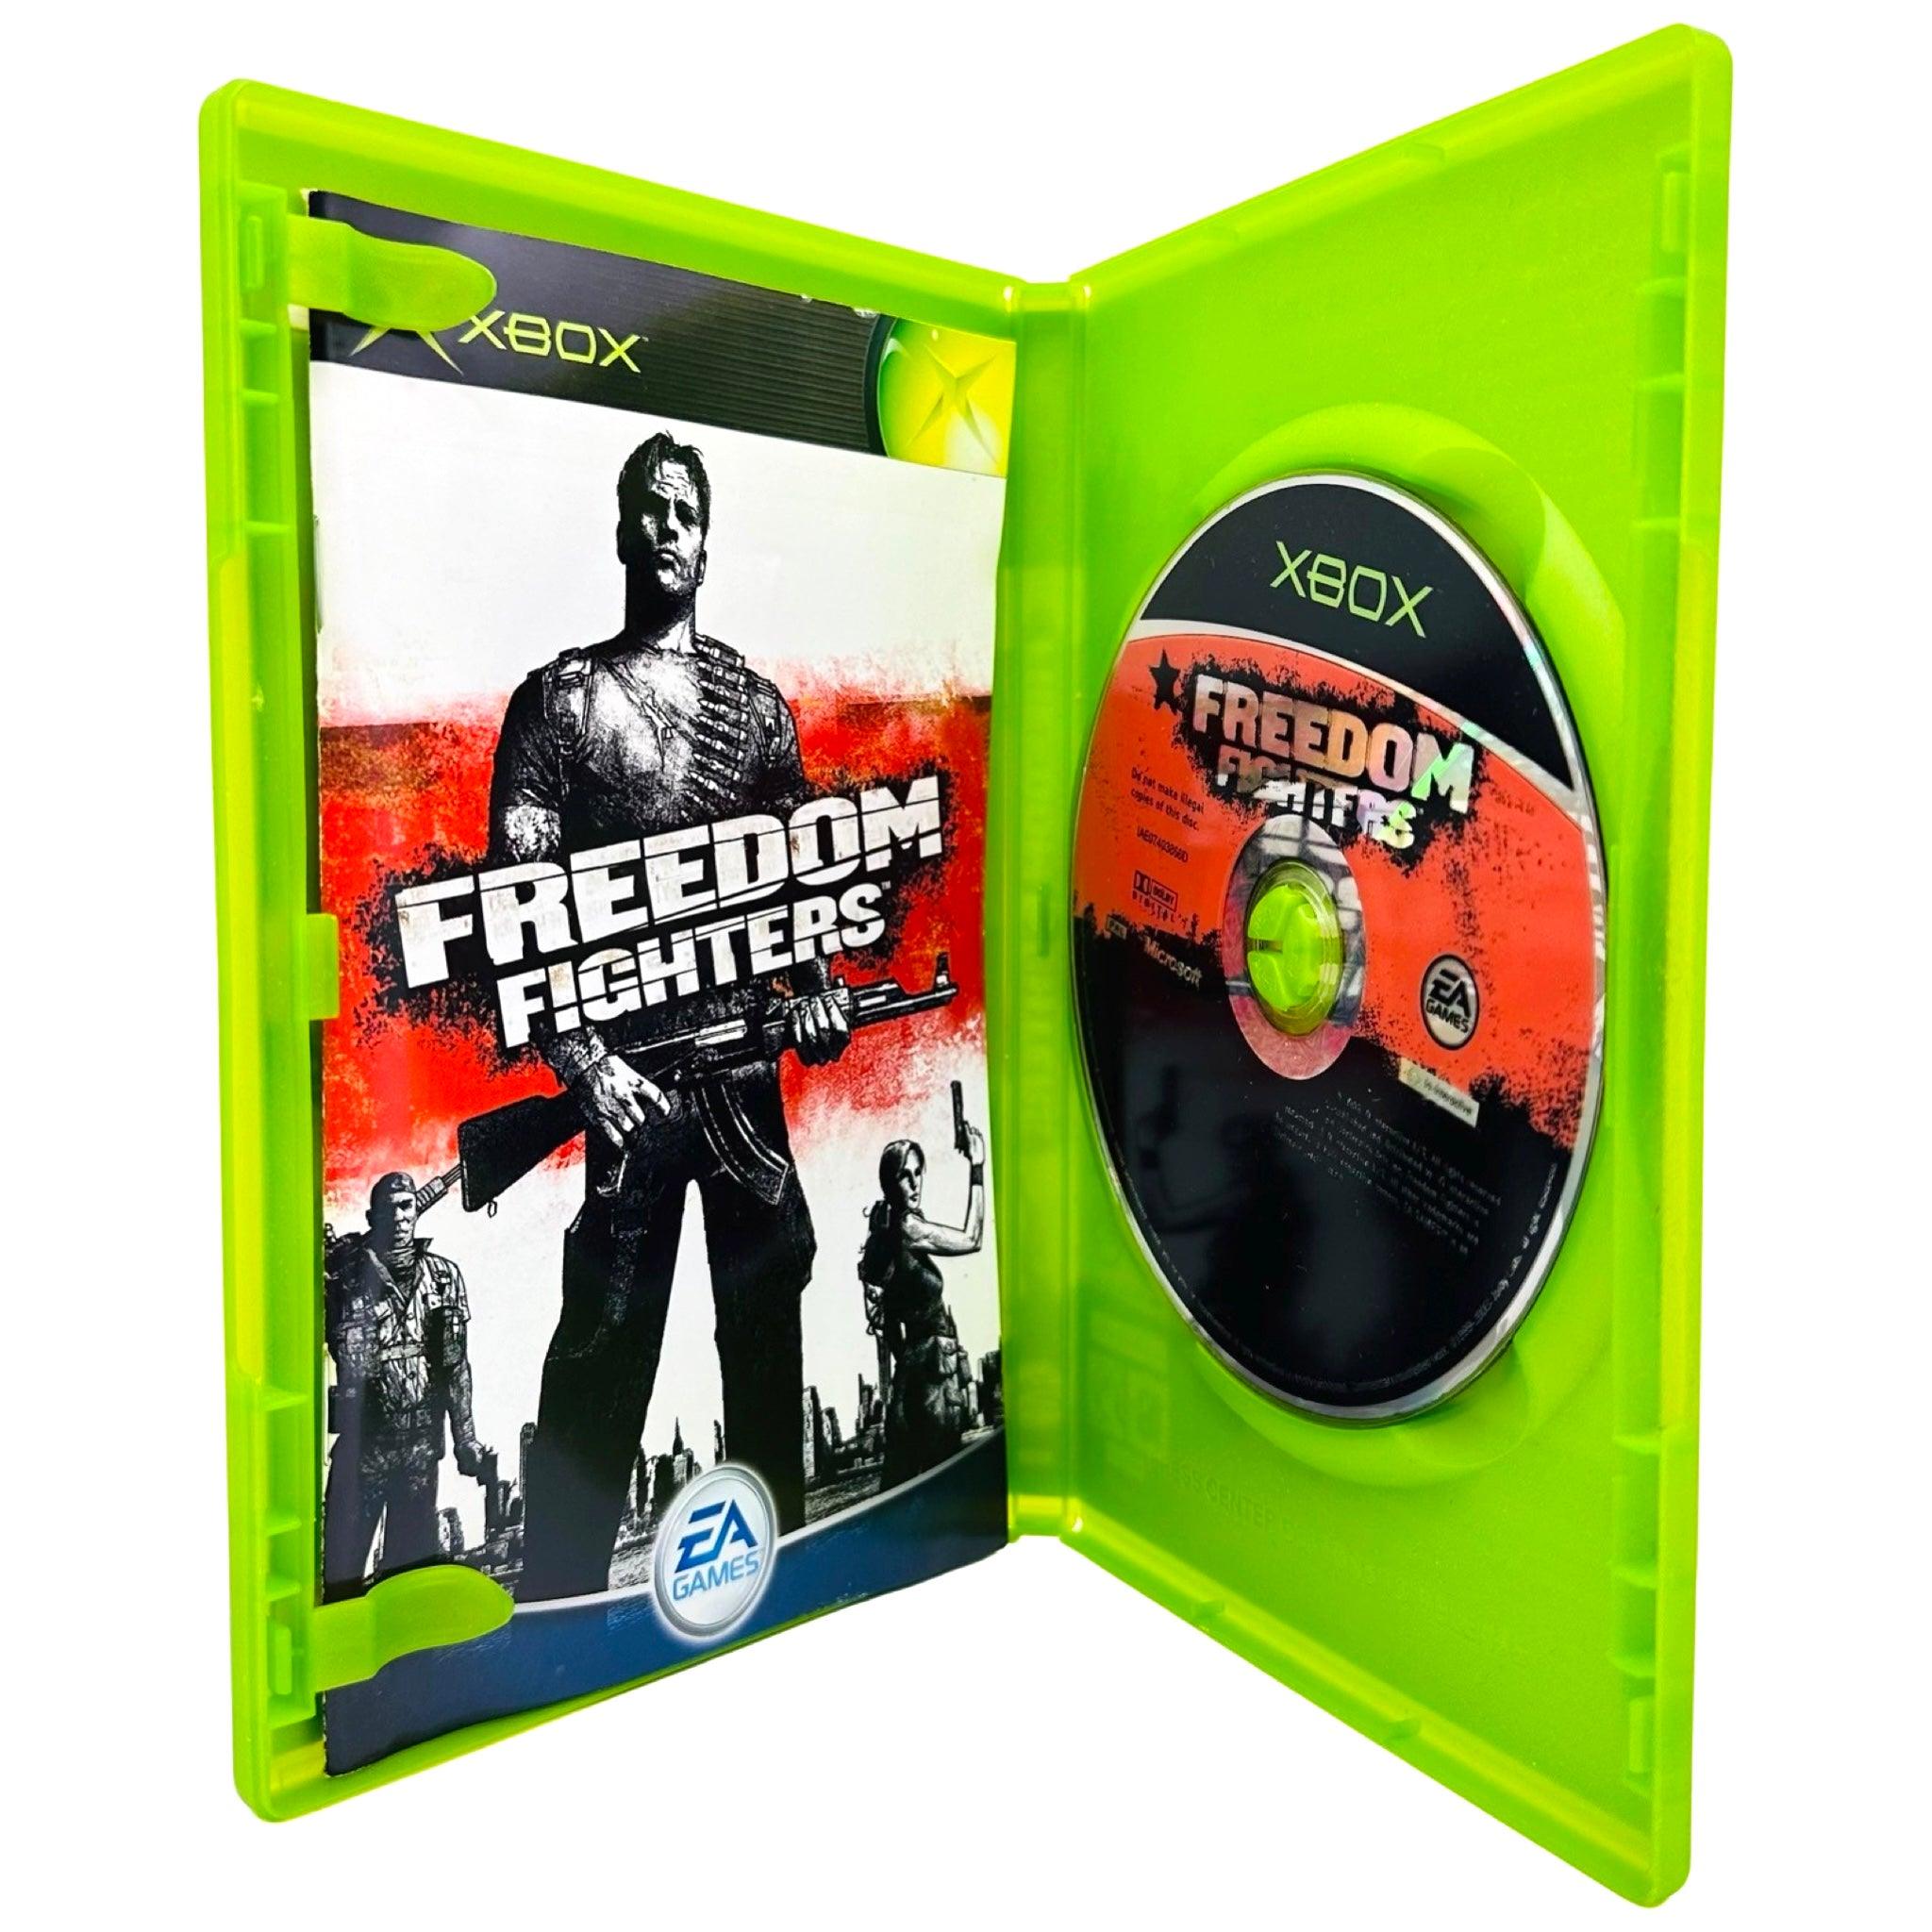 Xbox: Freedom Fighters - RetroGaming.no